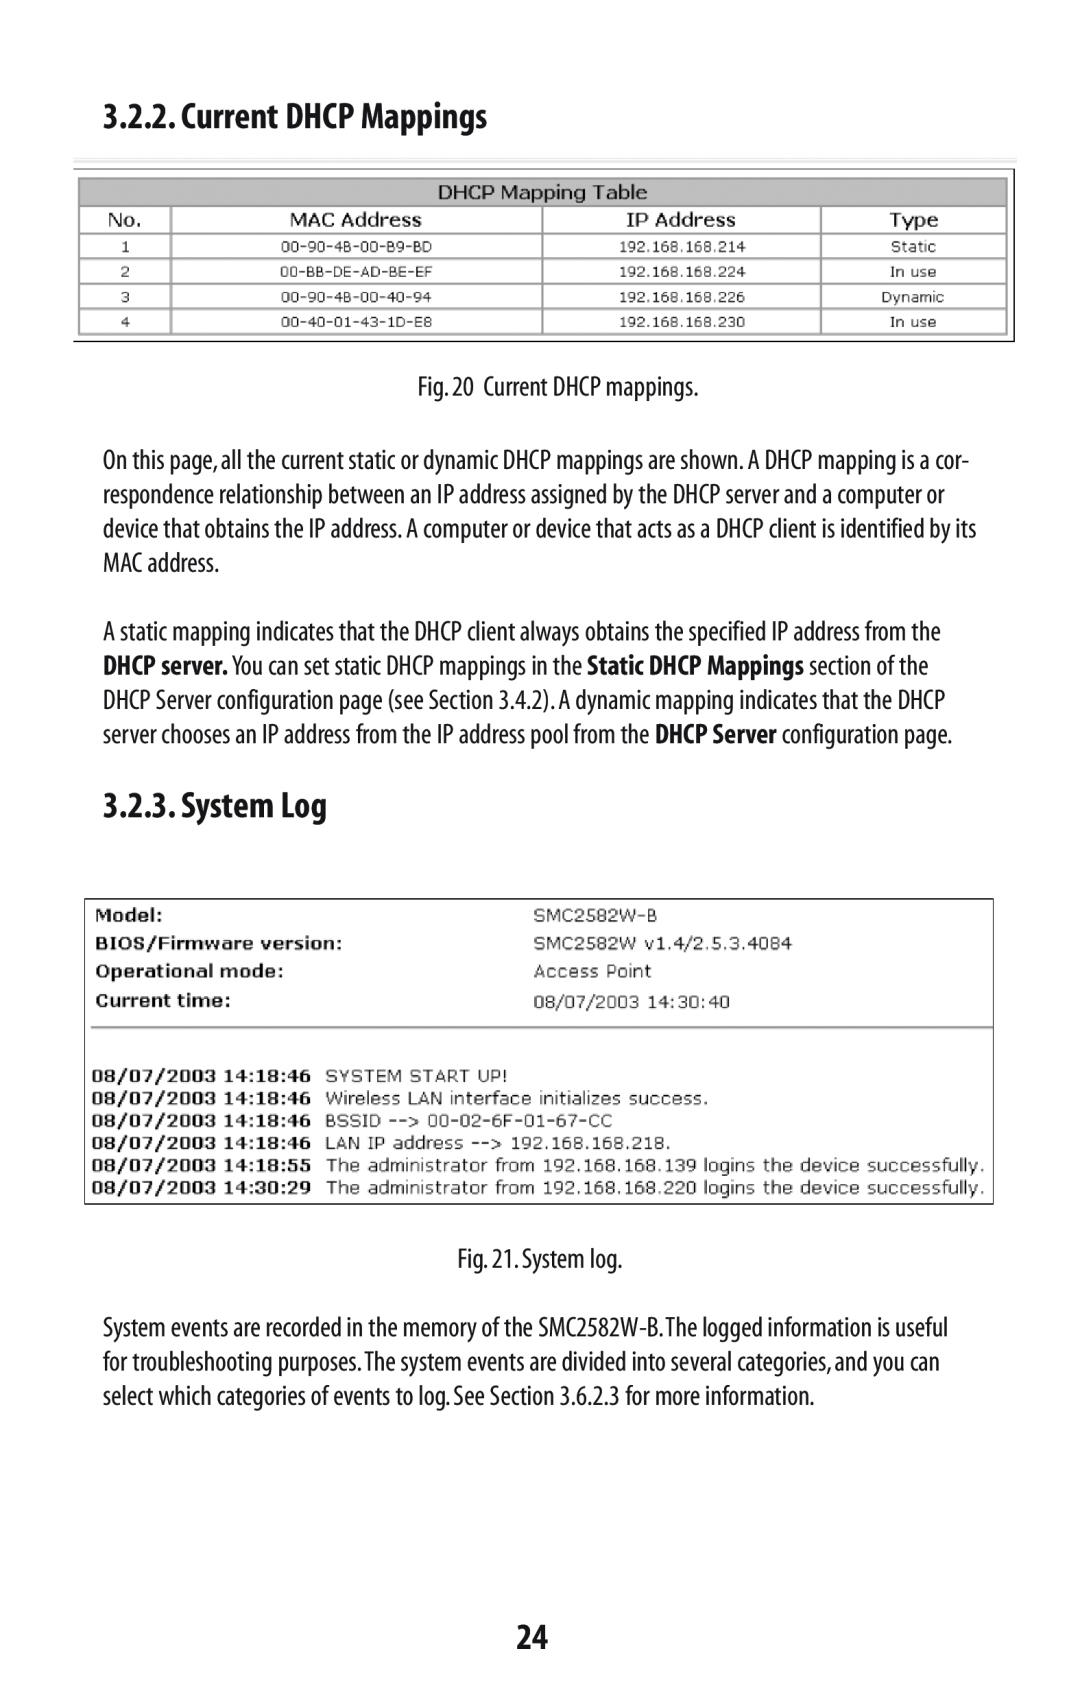 SMC Networks SMC2582W-B manual Current DHCP Mappings, System Log, Current DHCP mappings, System log 